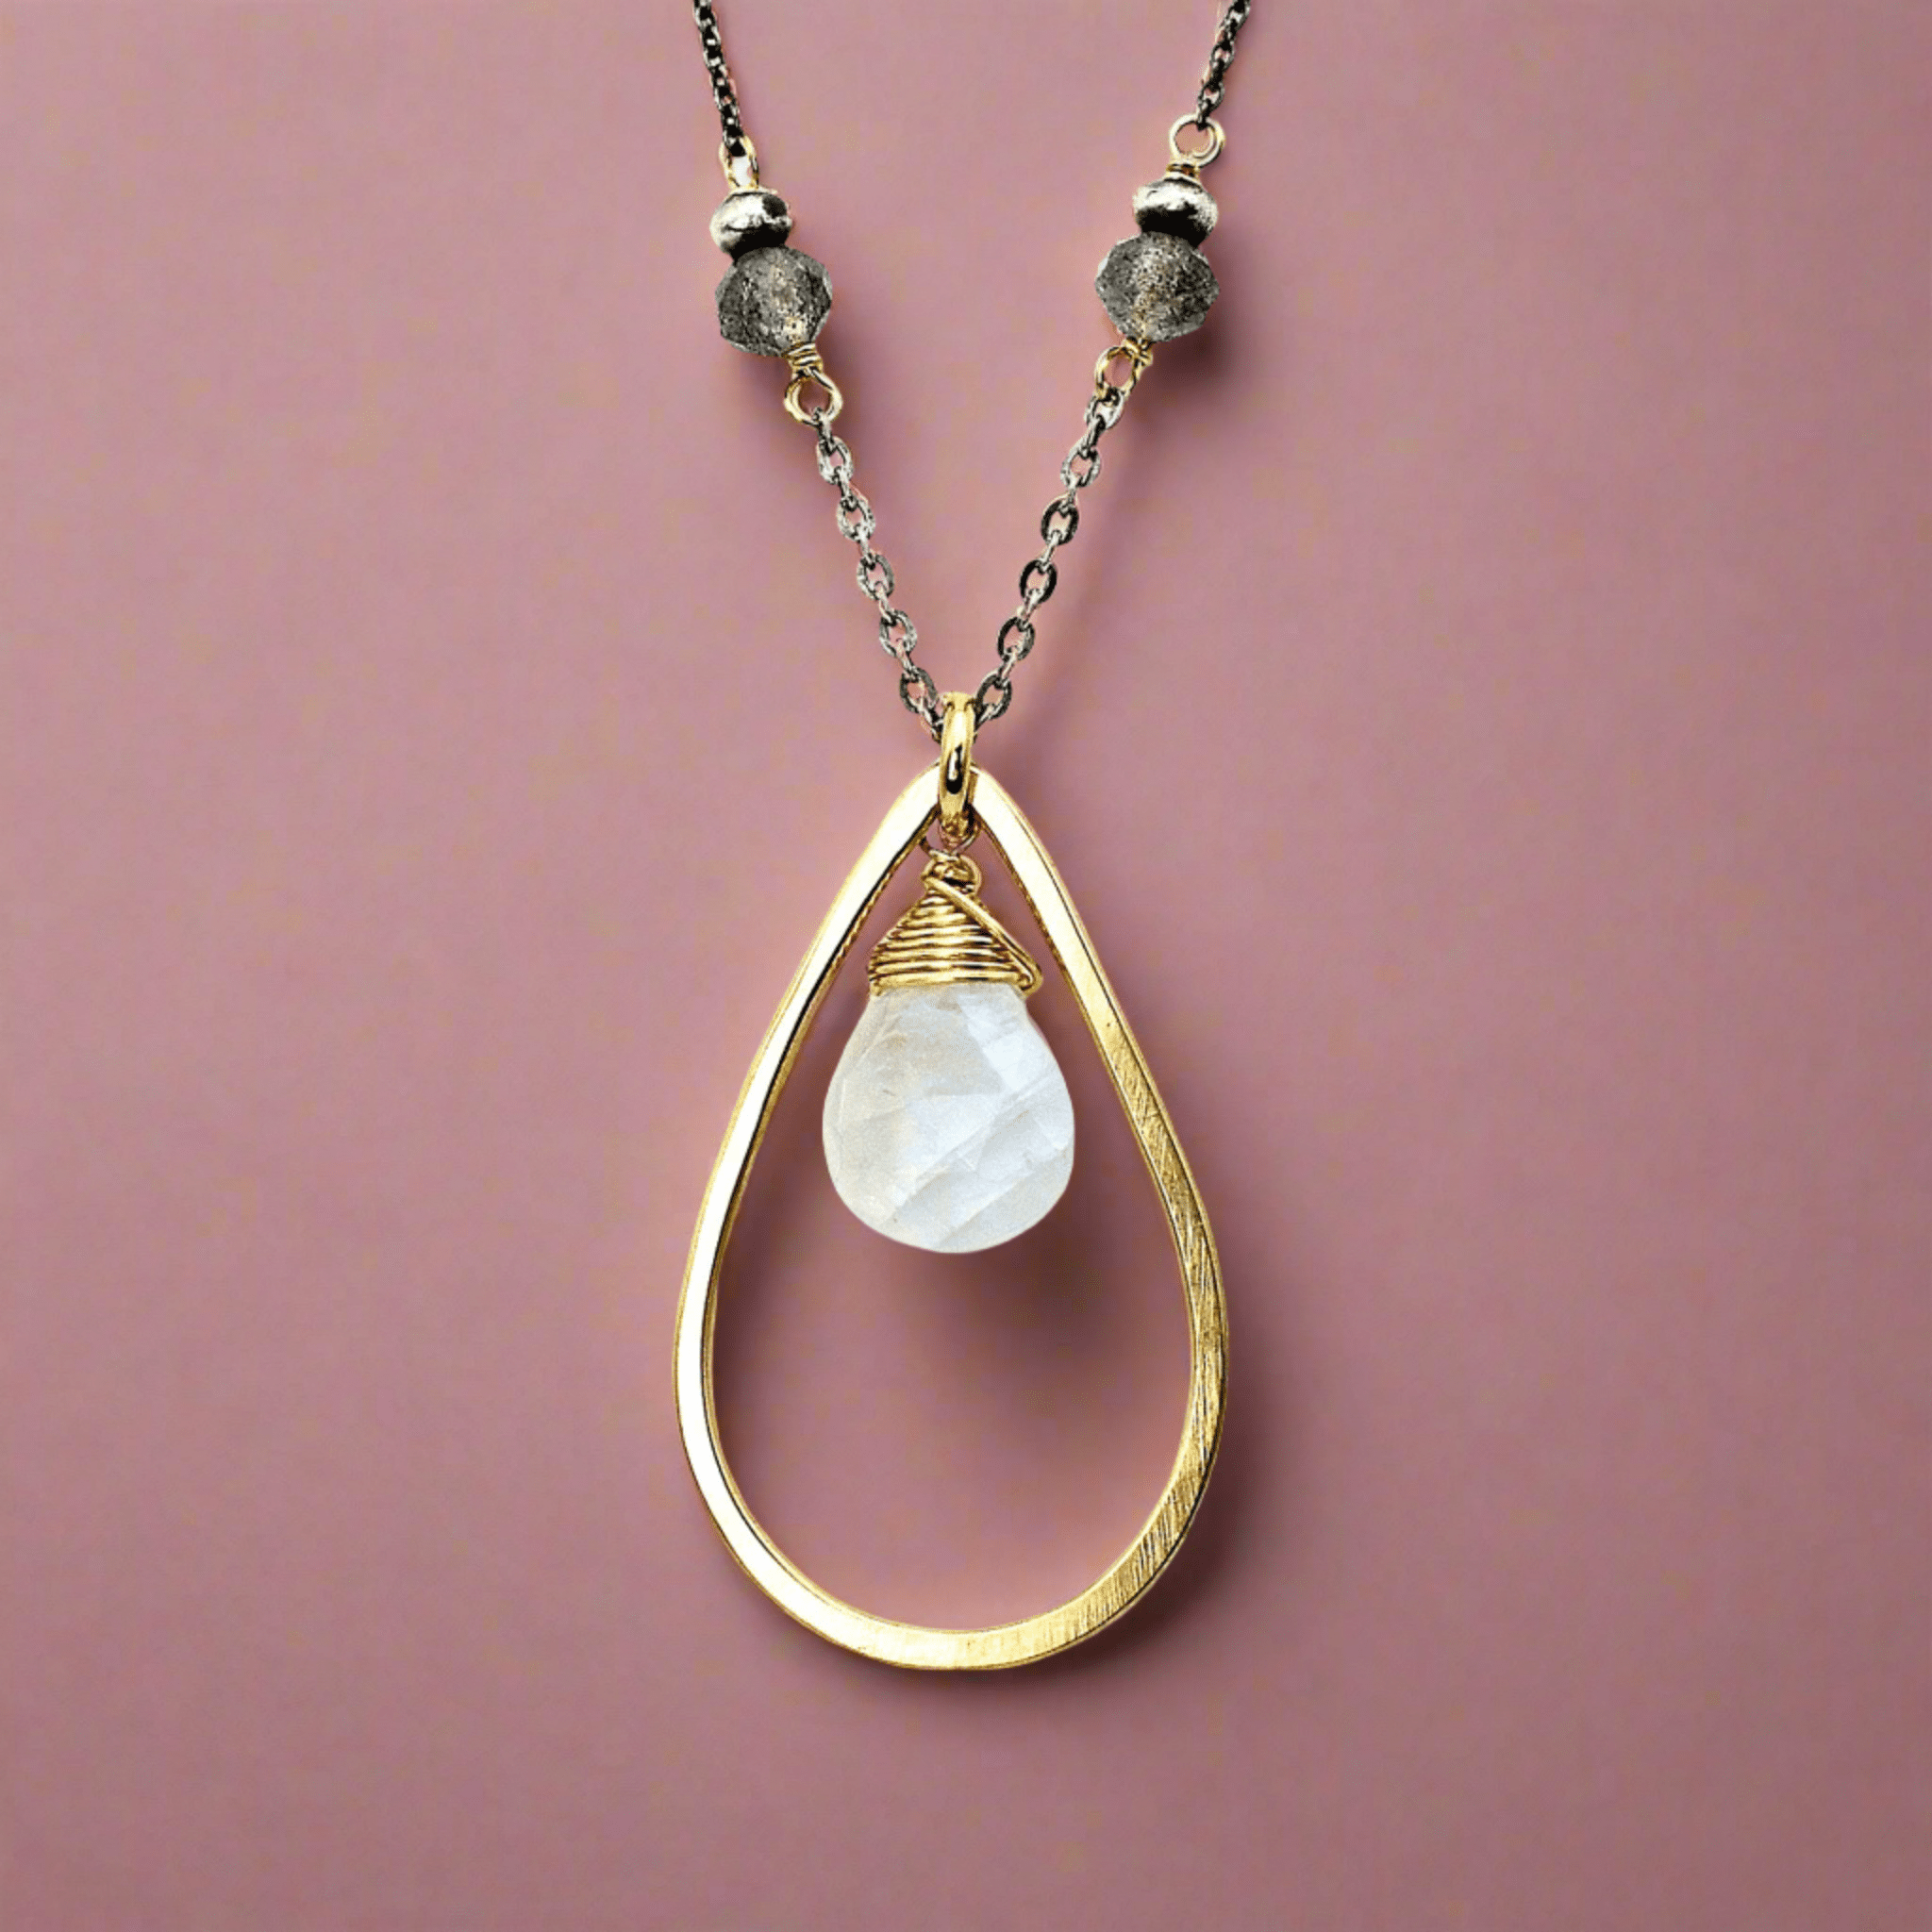 Faceted Moonstone Necklace - Necklaces